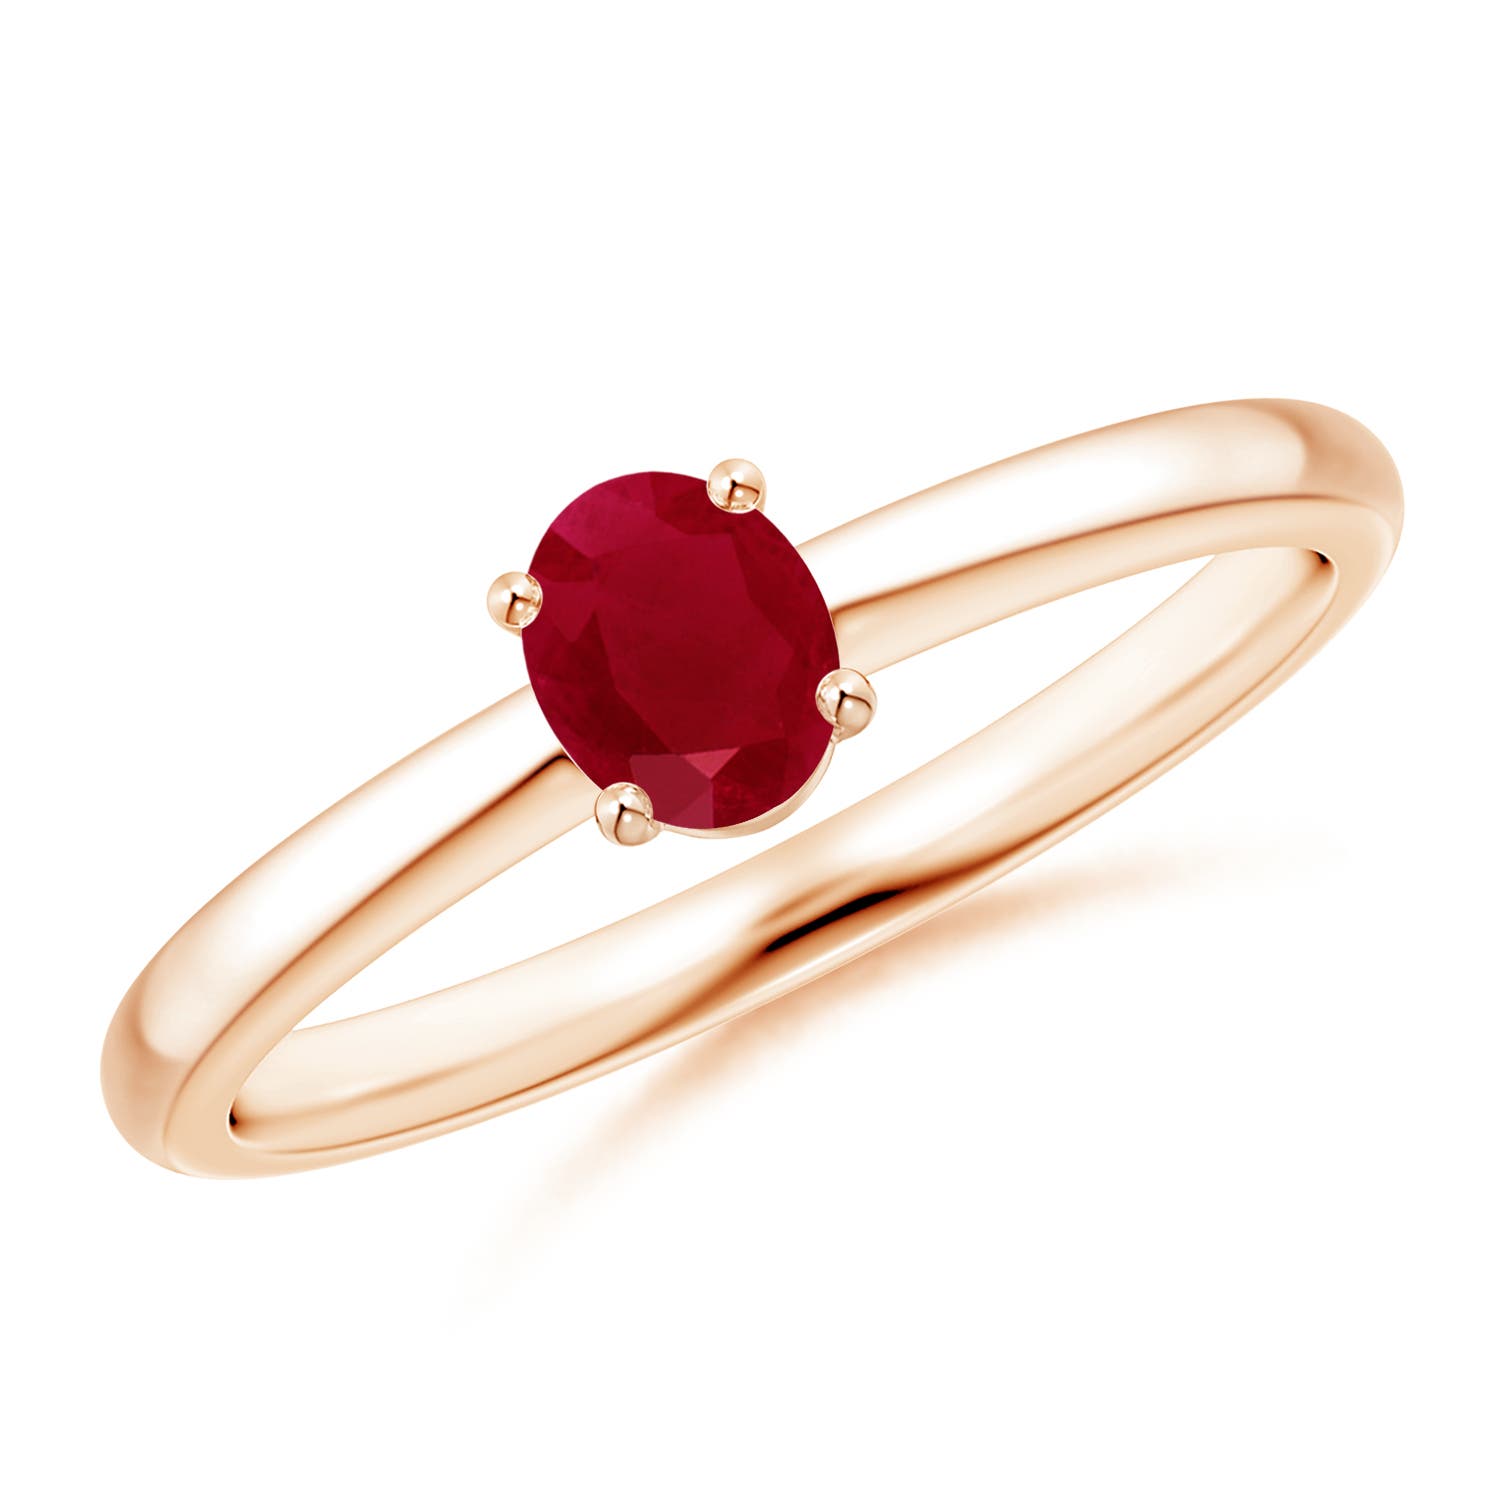 AA - Ruby / 0.4 CT / 14 KT Rose Gold